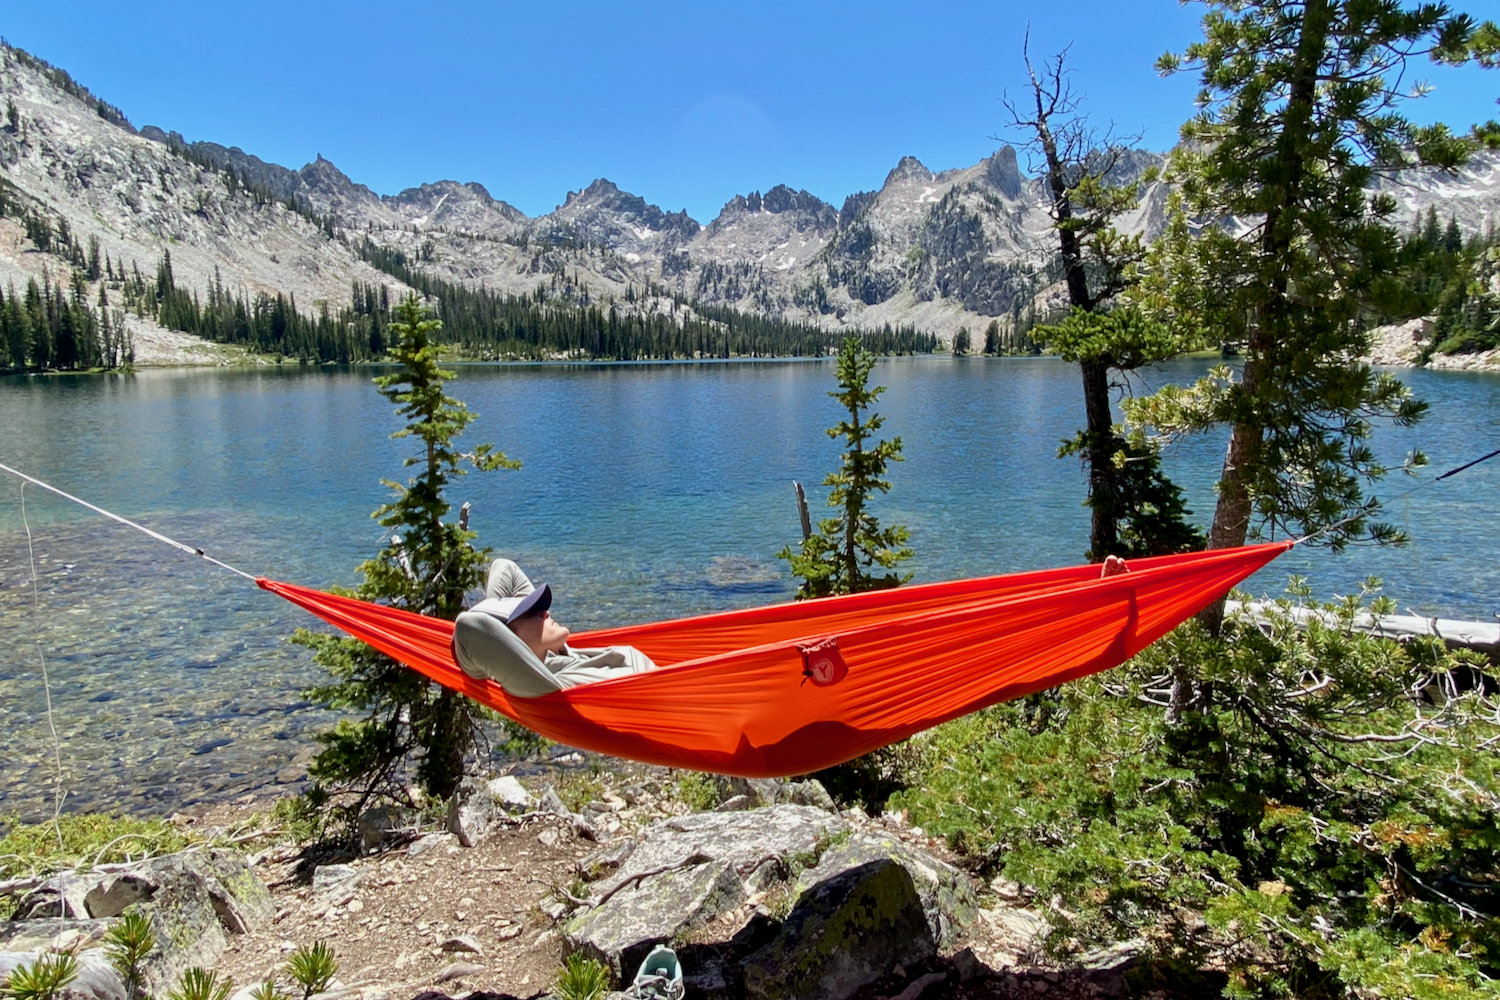 A backpacker relaxing in a red Eno Ultralight Sub6 hammock near a mountain lake in the Enchantments